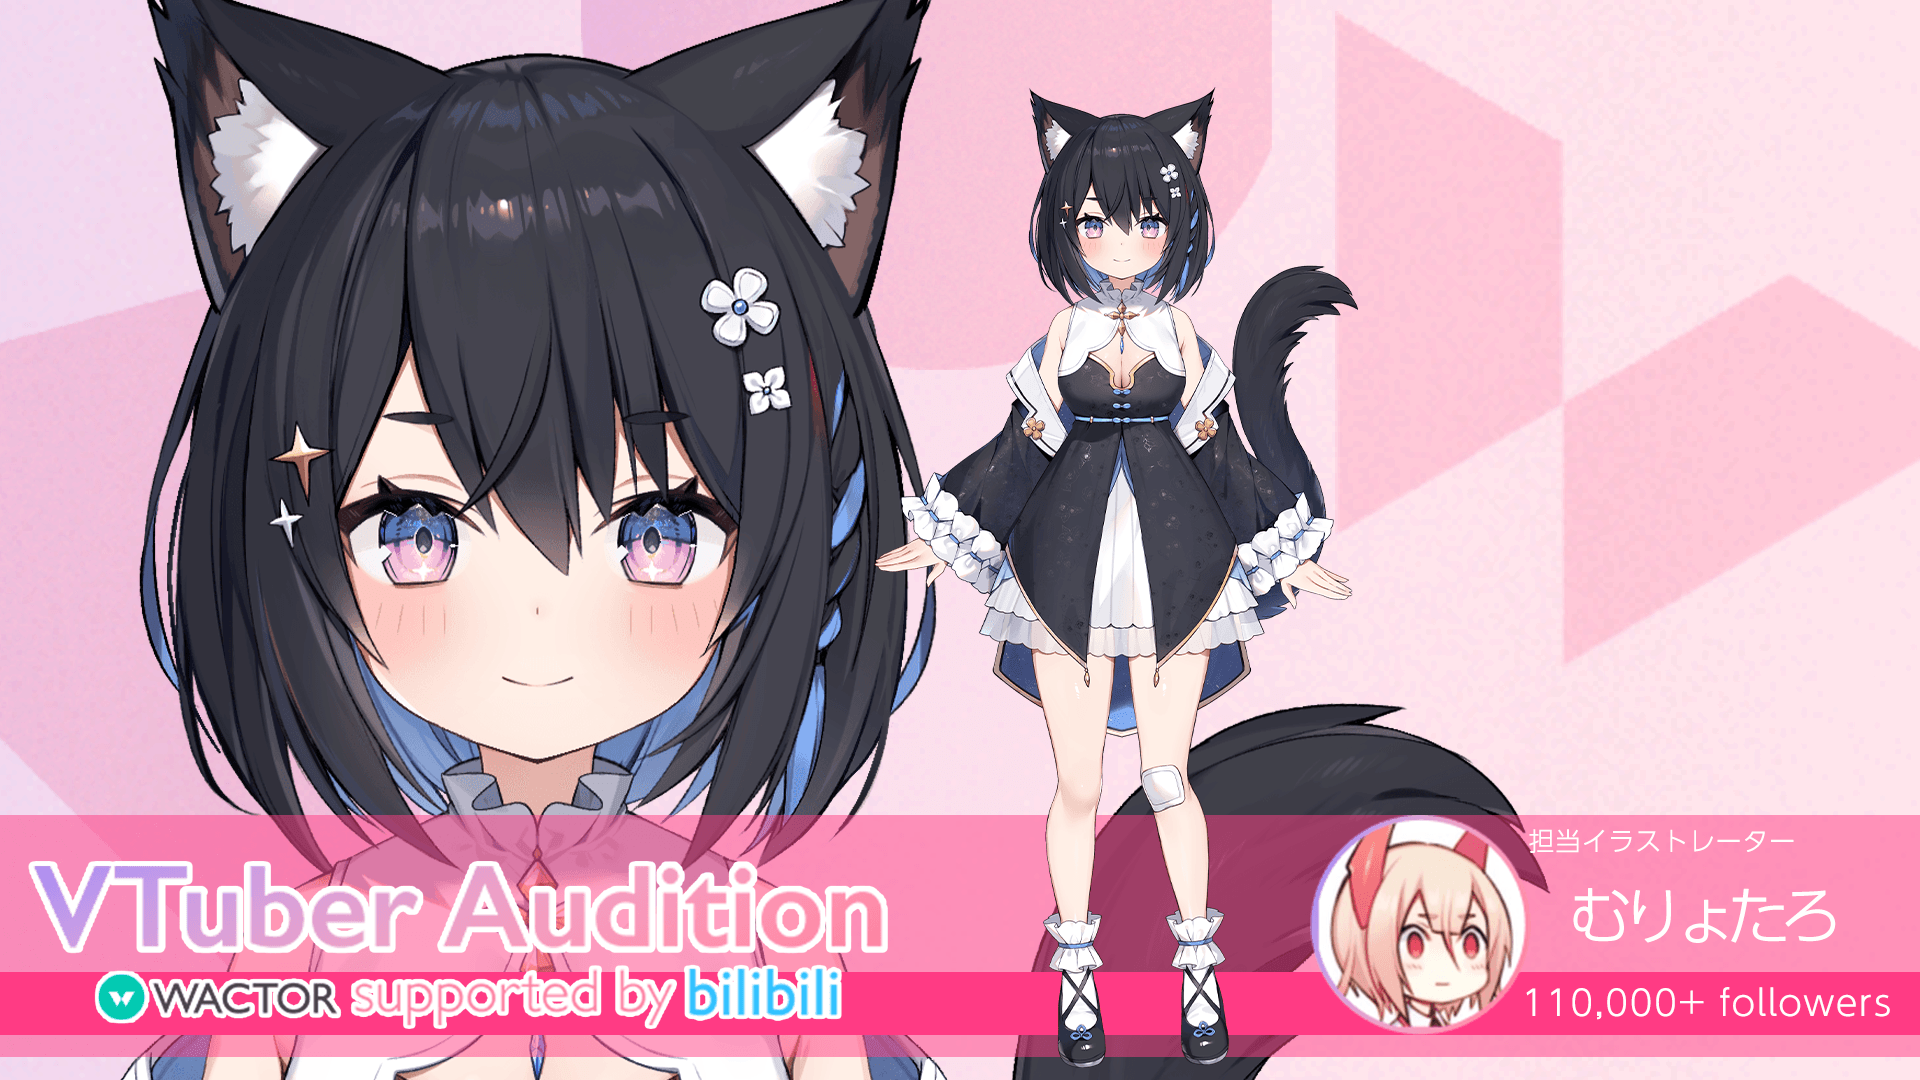 wactor-vtuber-audition-supported-by-bilibili-5-2